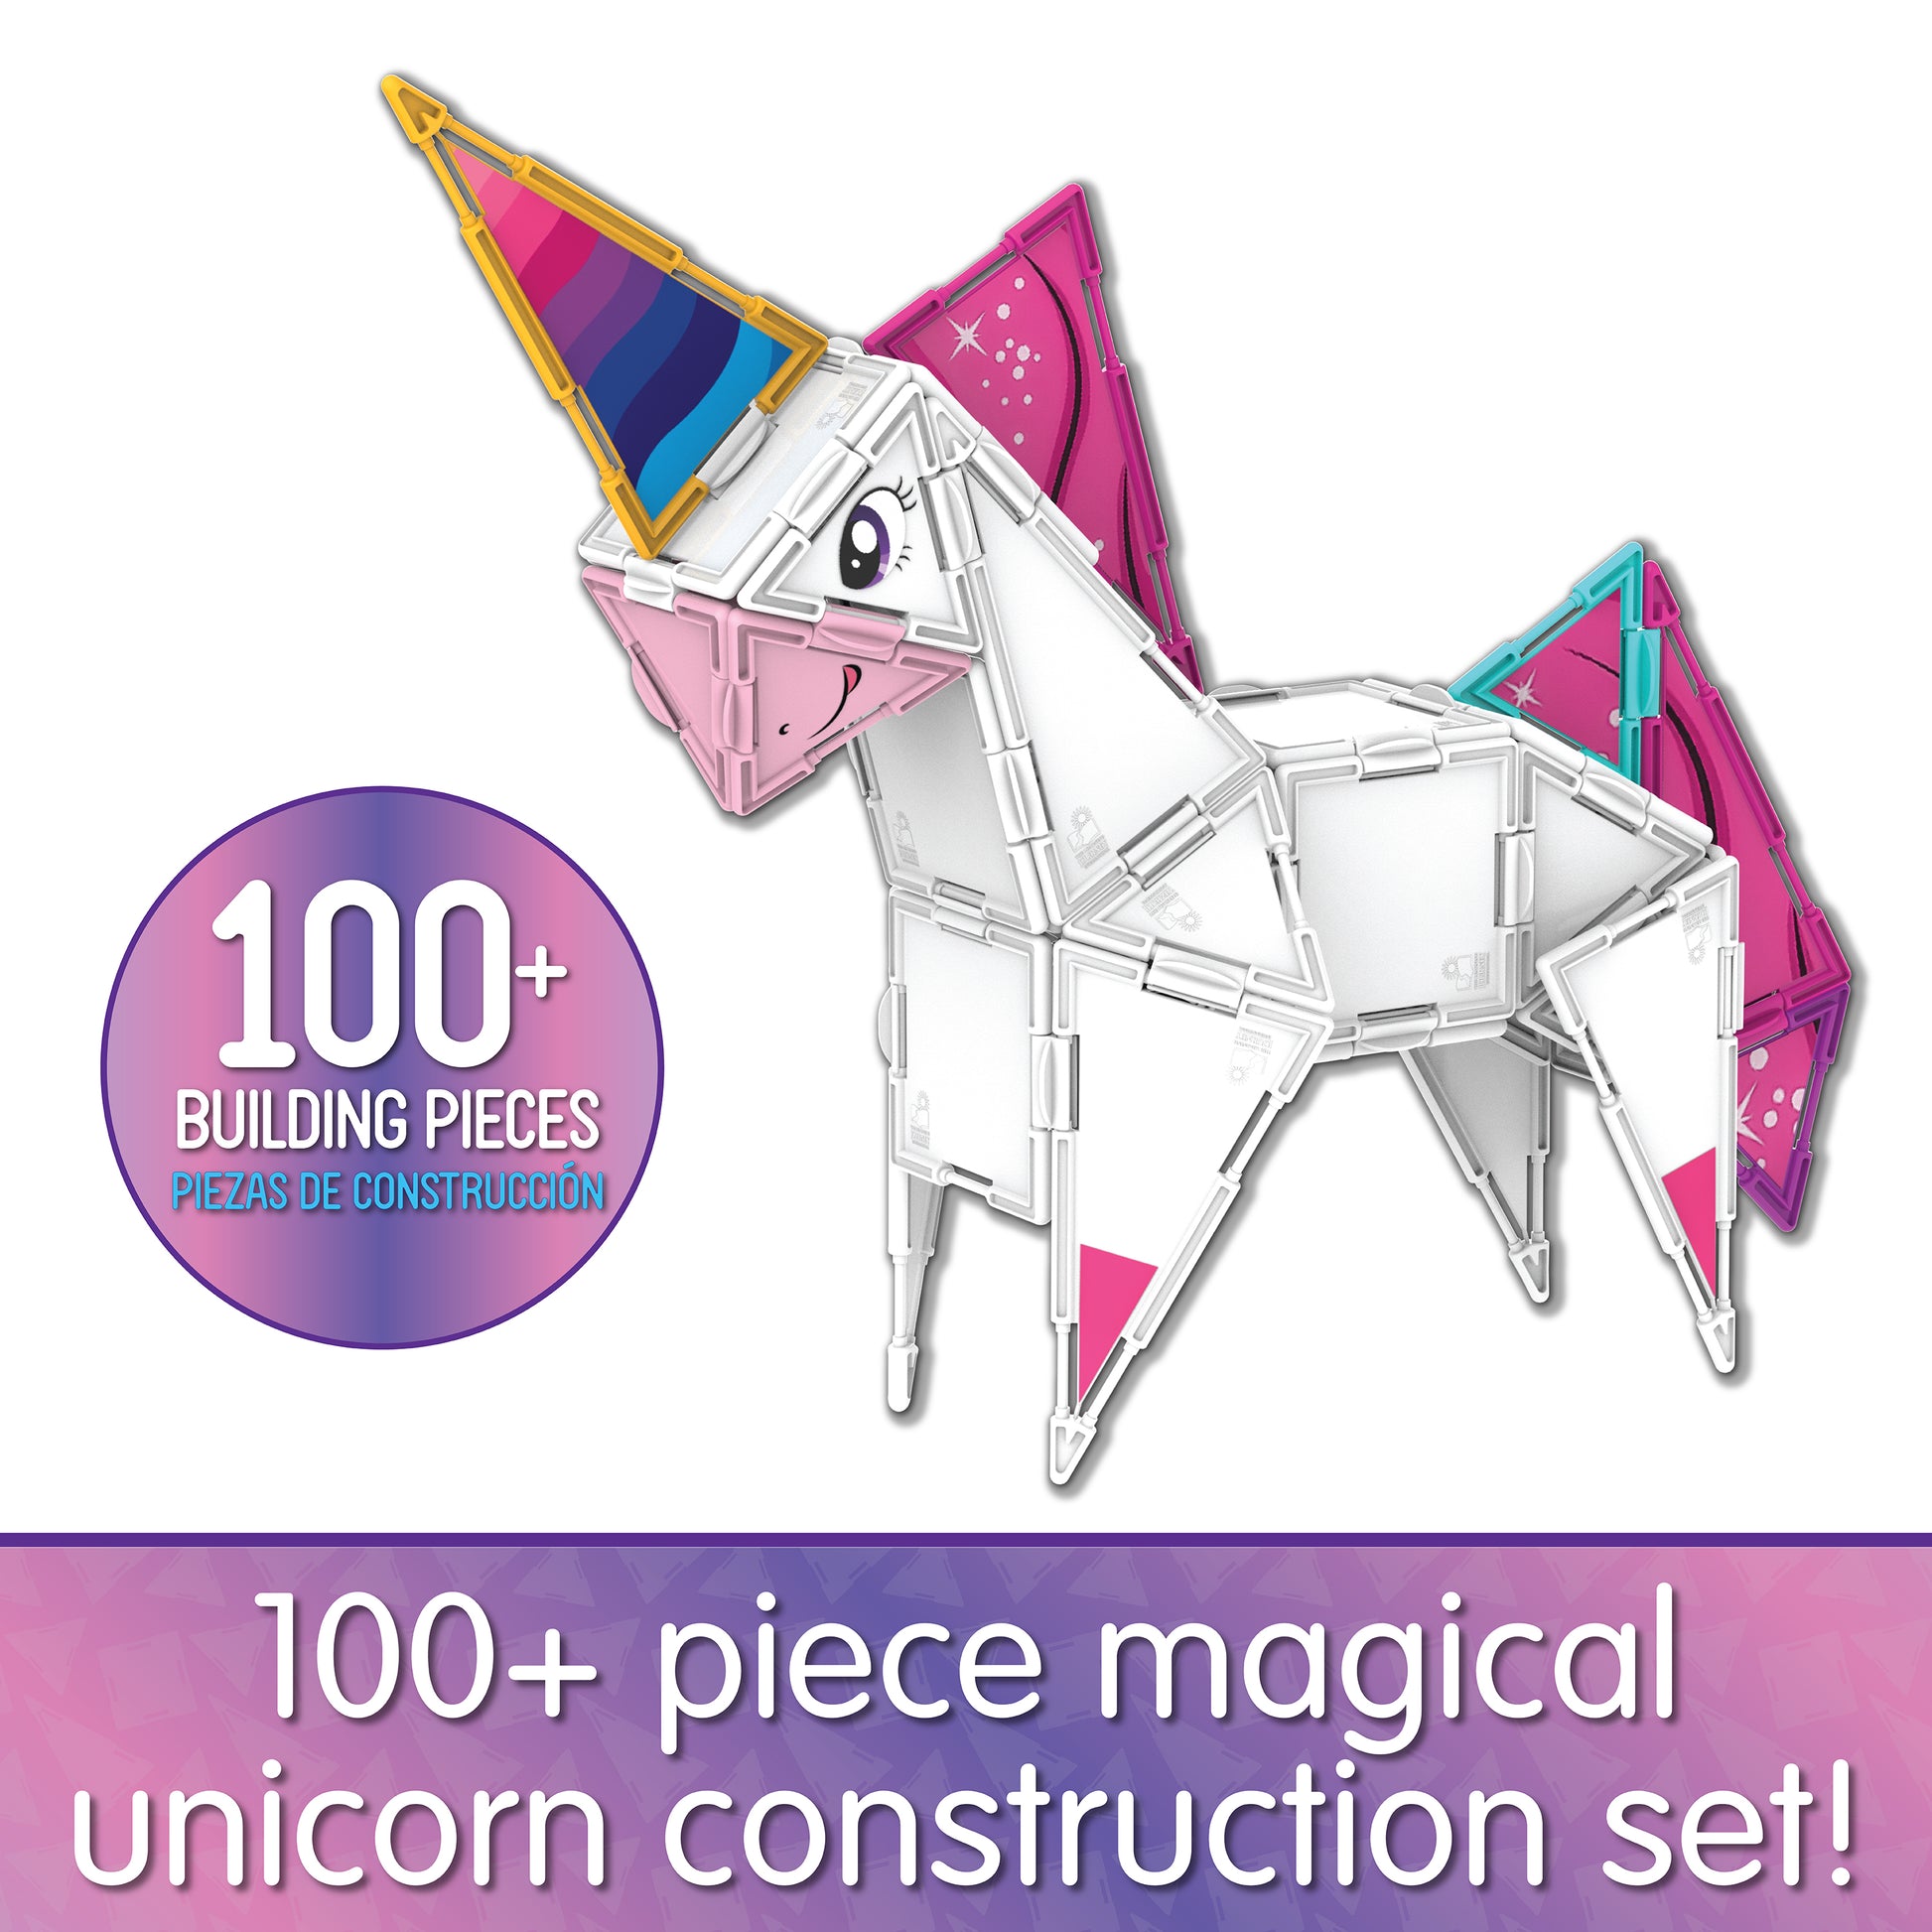 Infographic about Magical Unicorn